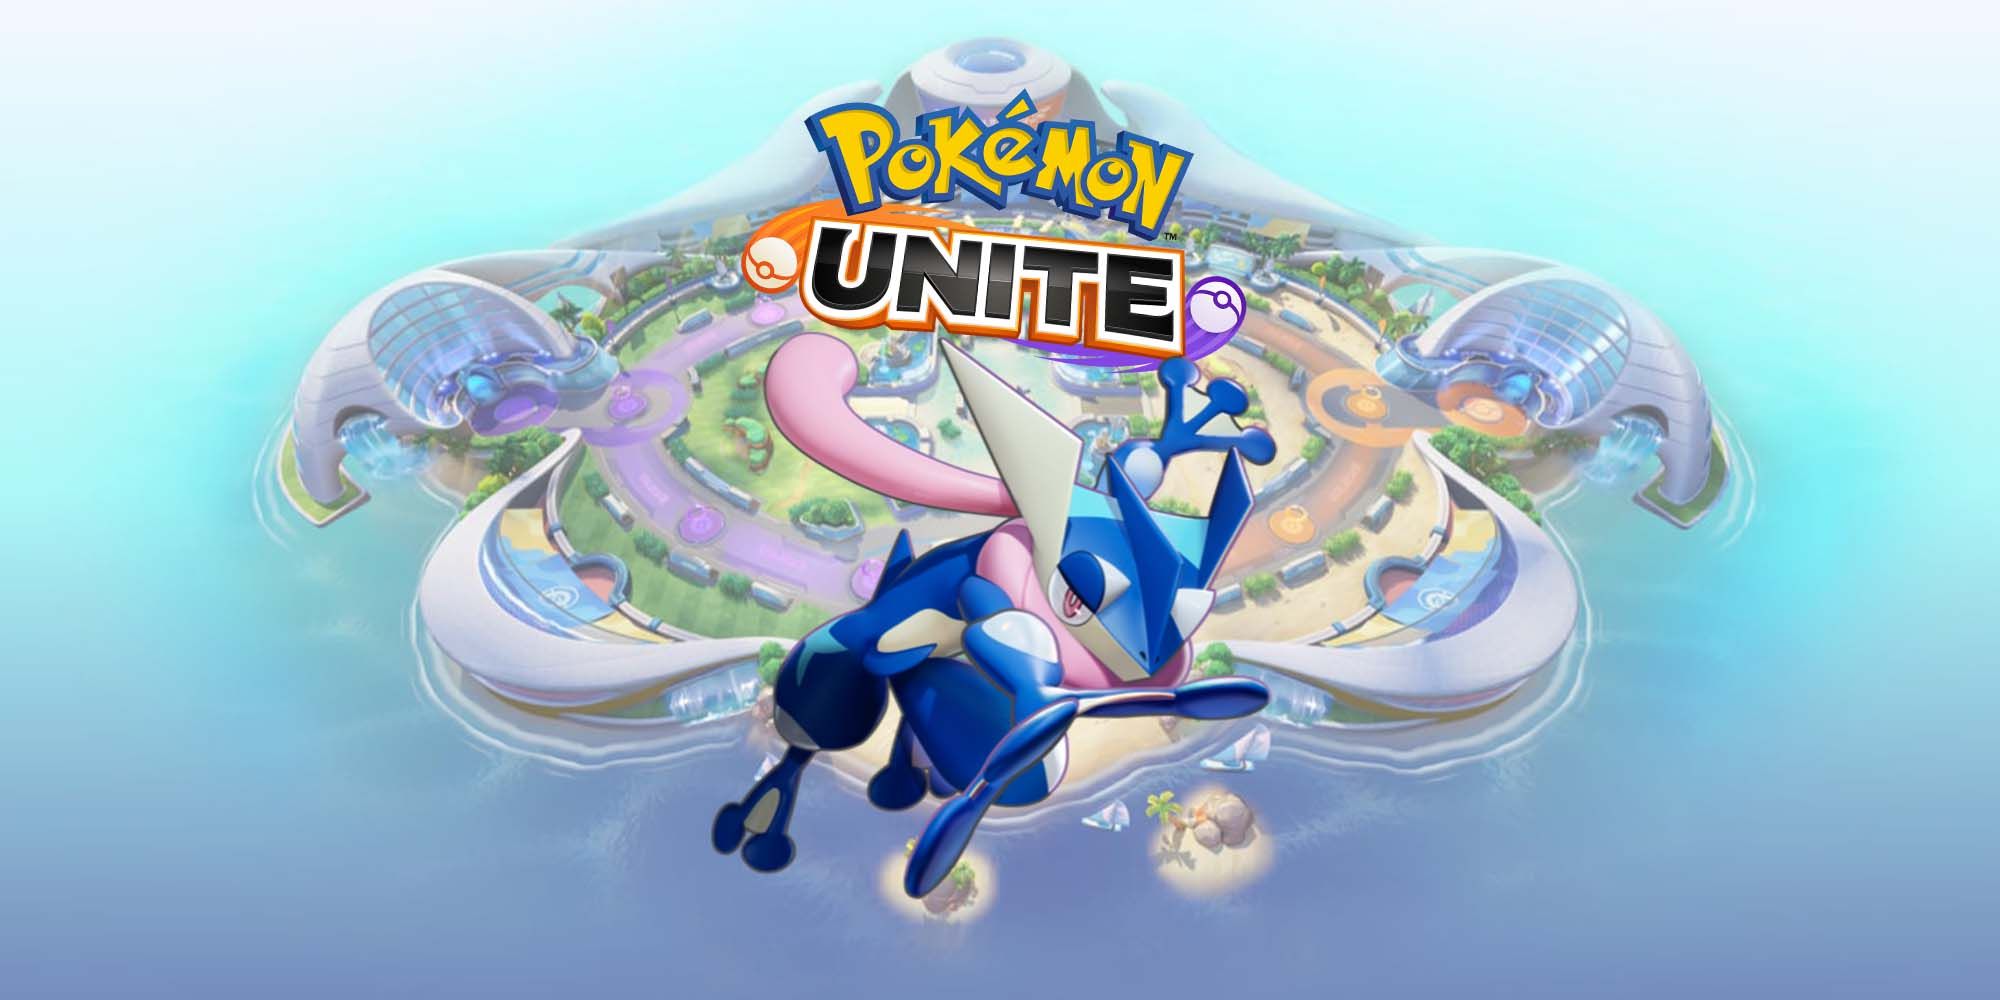 Greninja from Pokemon Unite in front of an image of the island and game logo